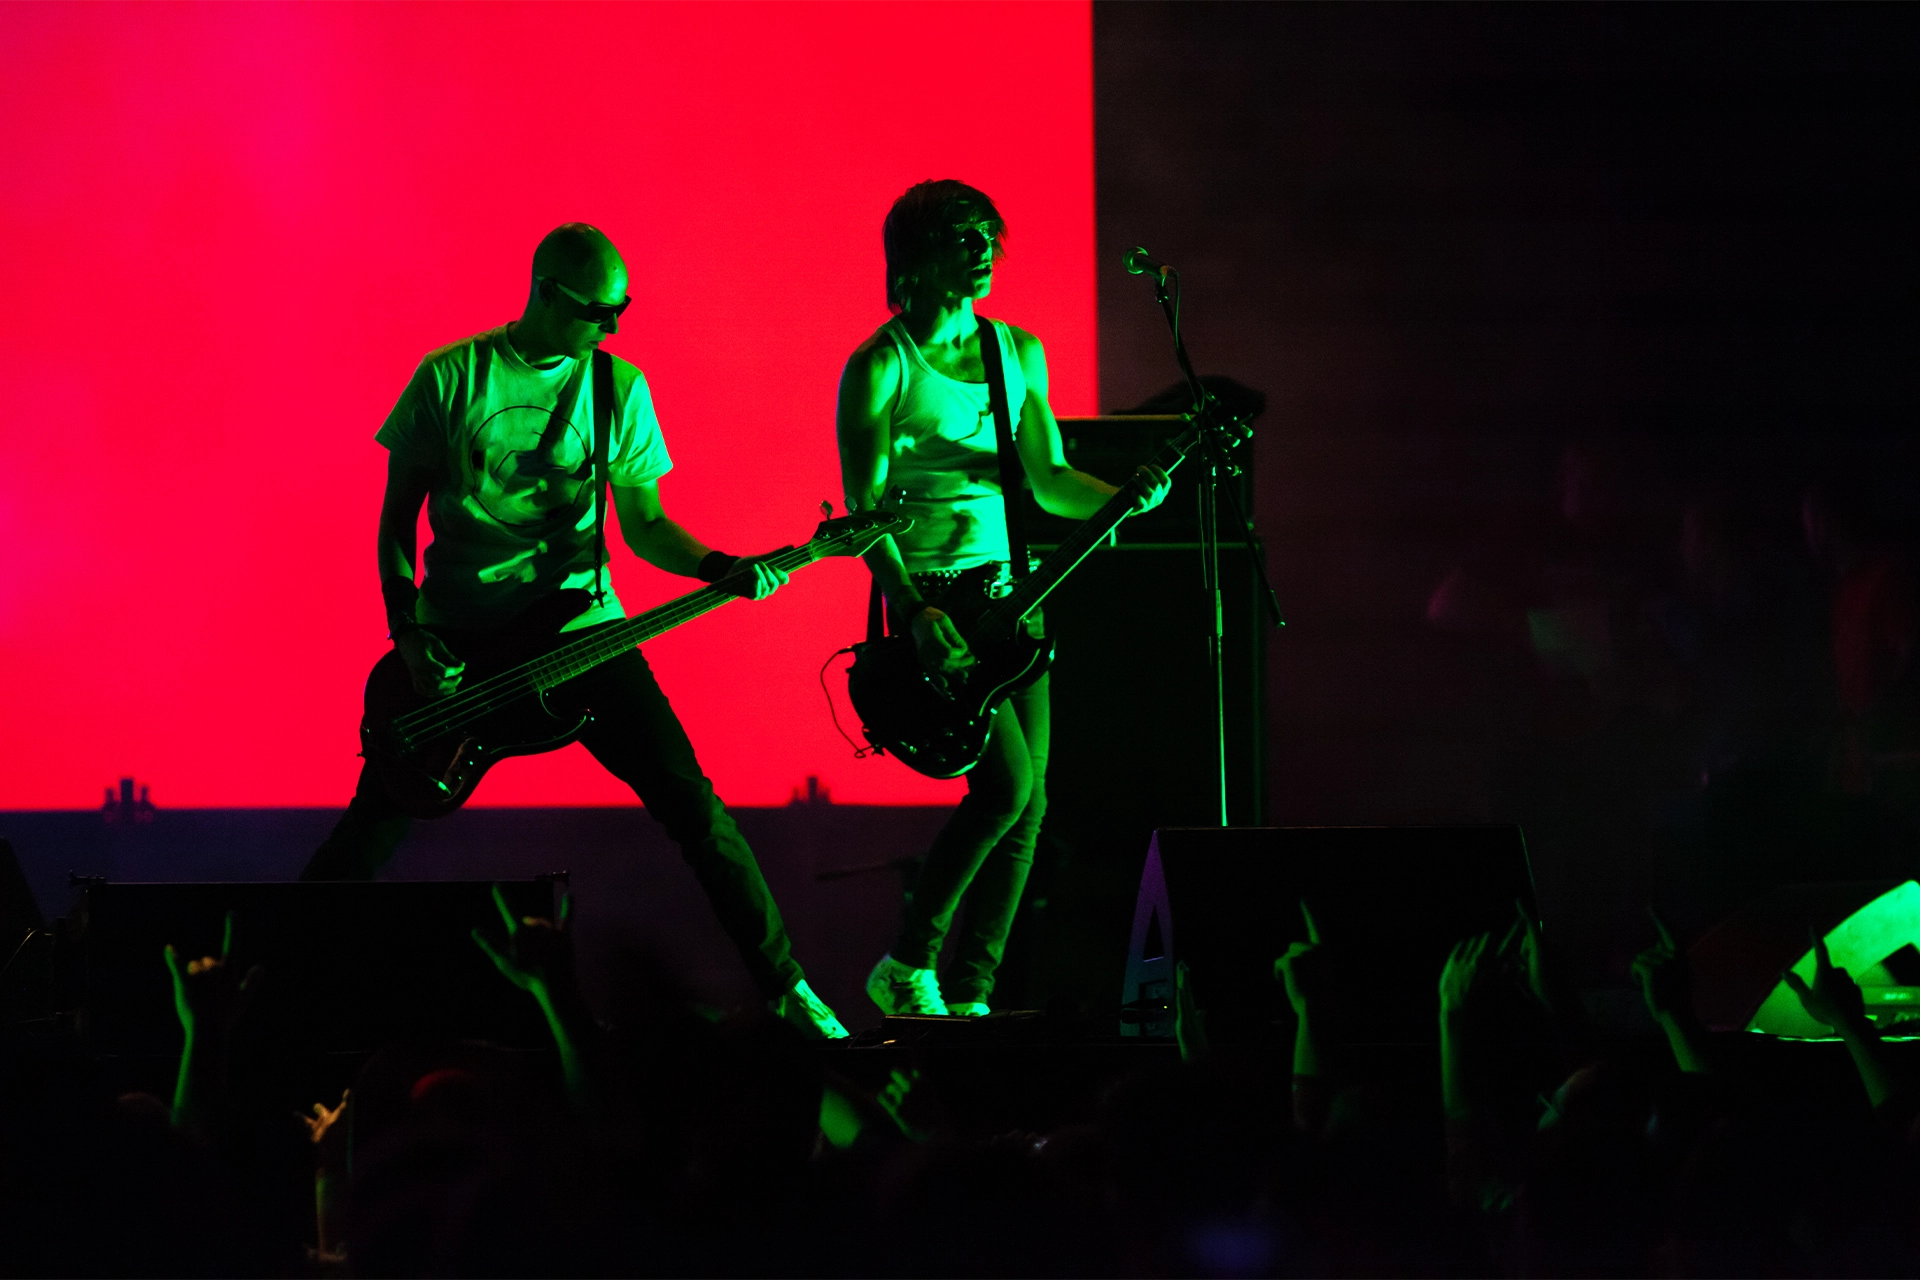 Two guitarists on a dark stage